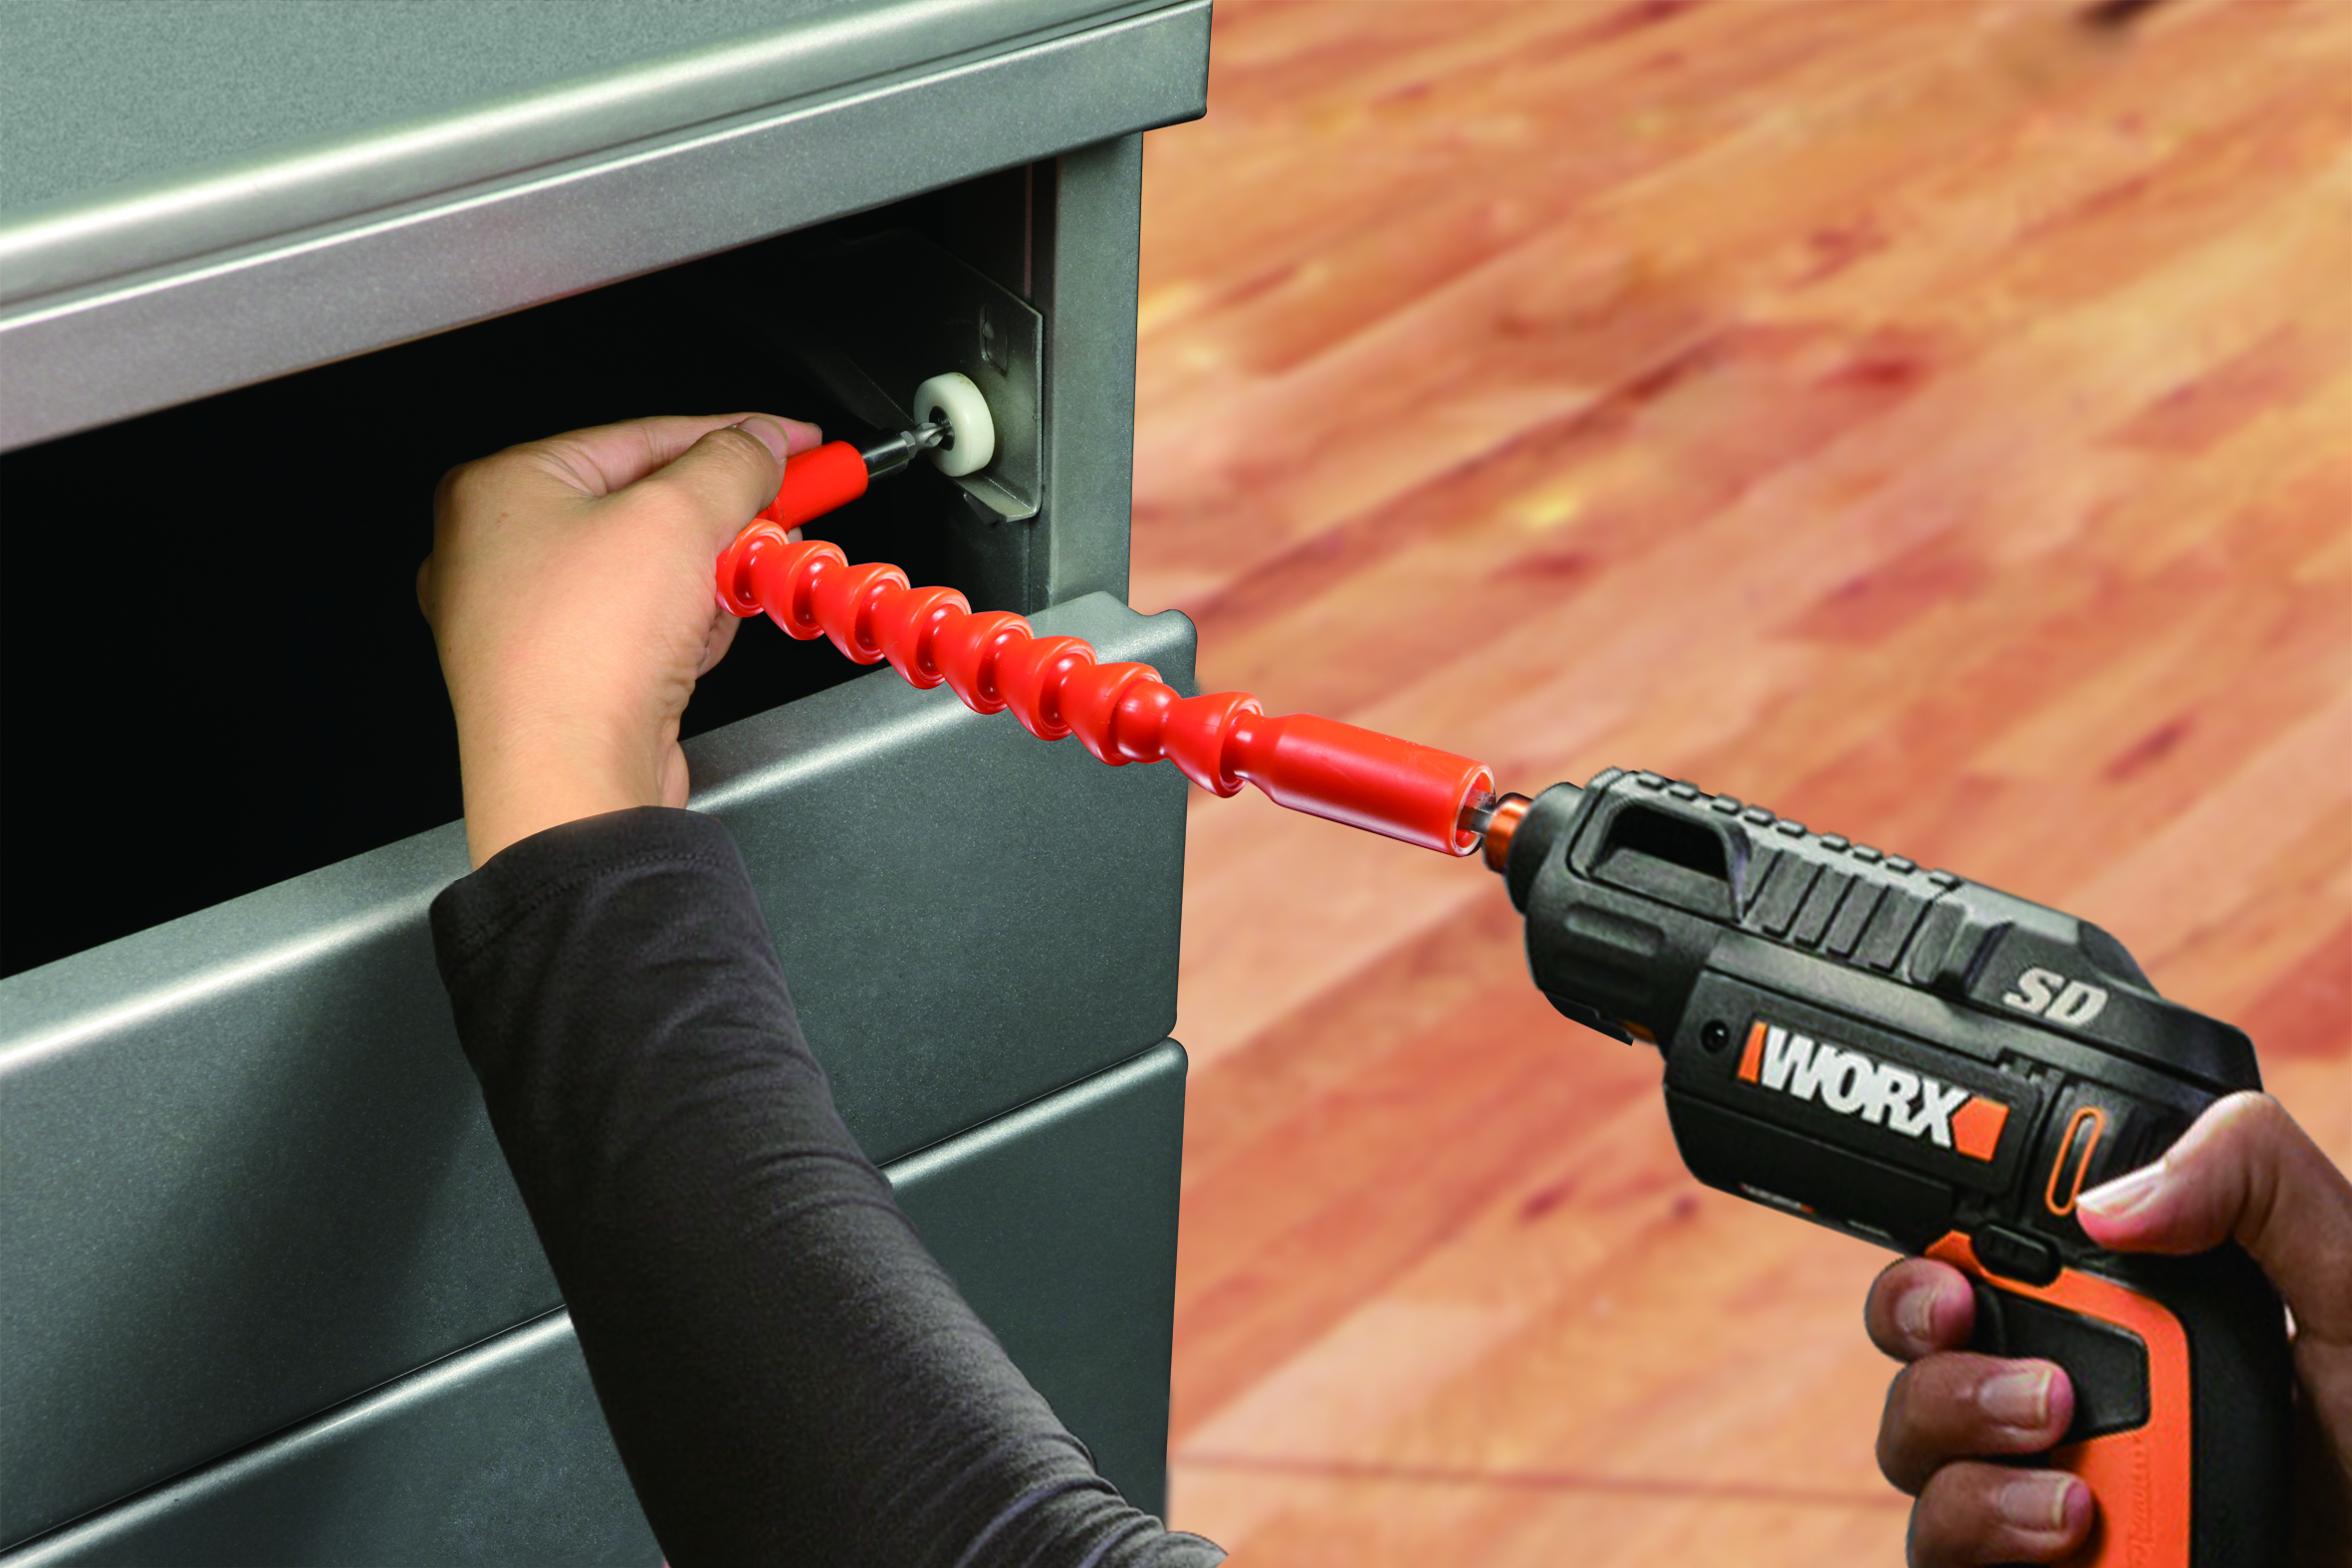 WORX Flexible Shaft bends 180º to reach fasteners in difficult locations.